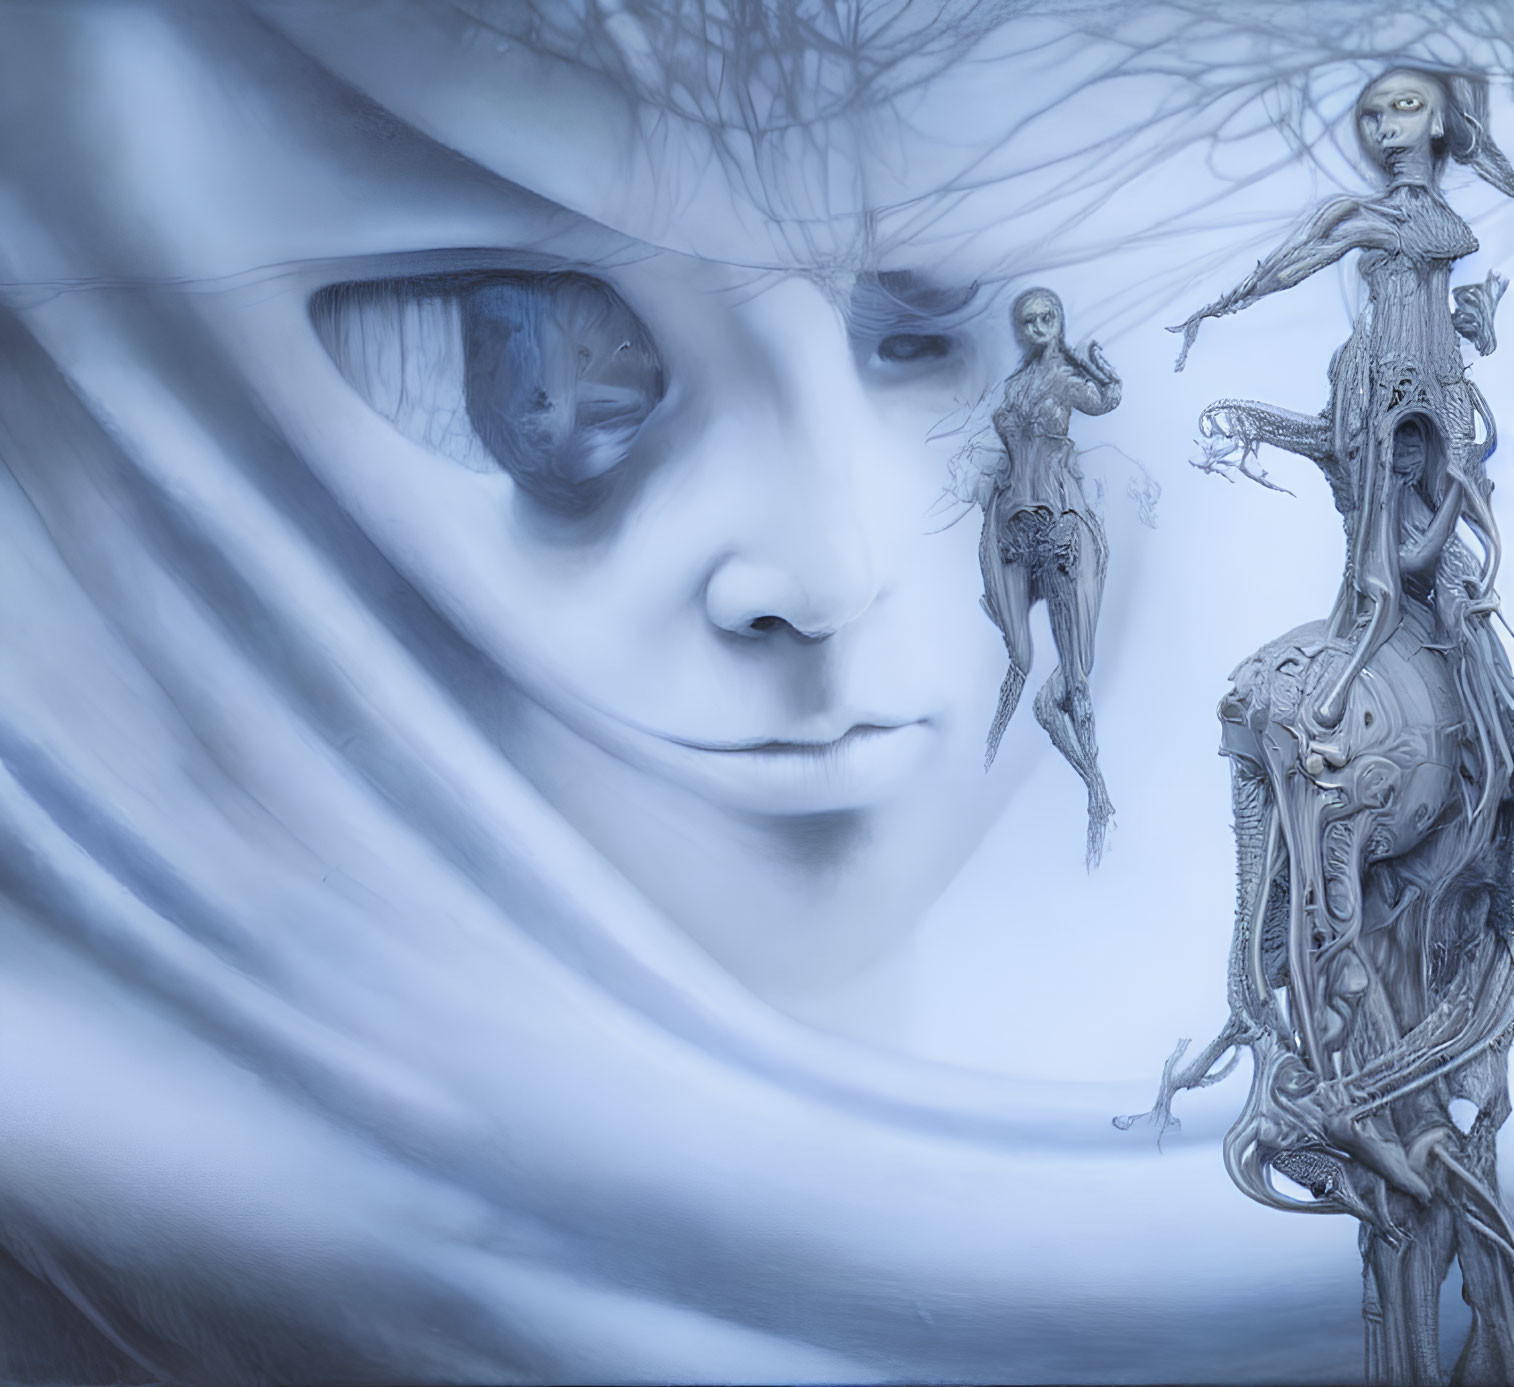 Surreal blue-toned image of eerie face and ethereal figures